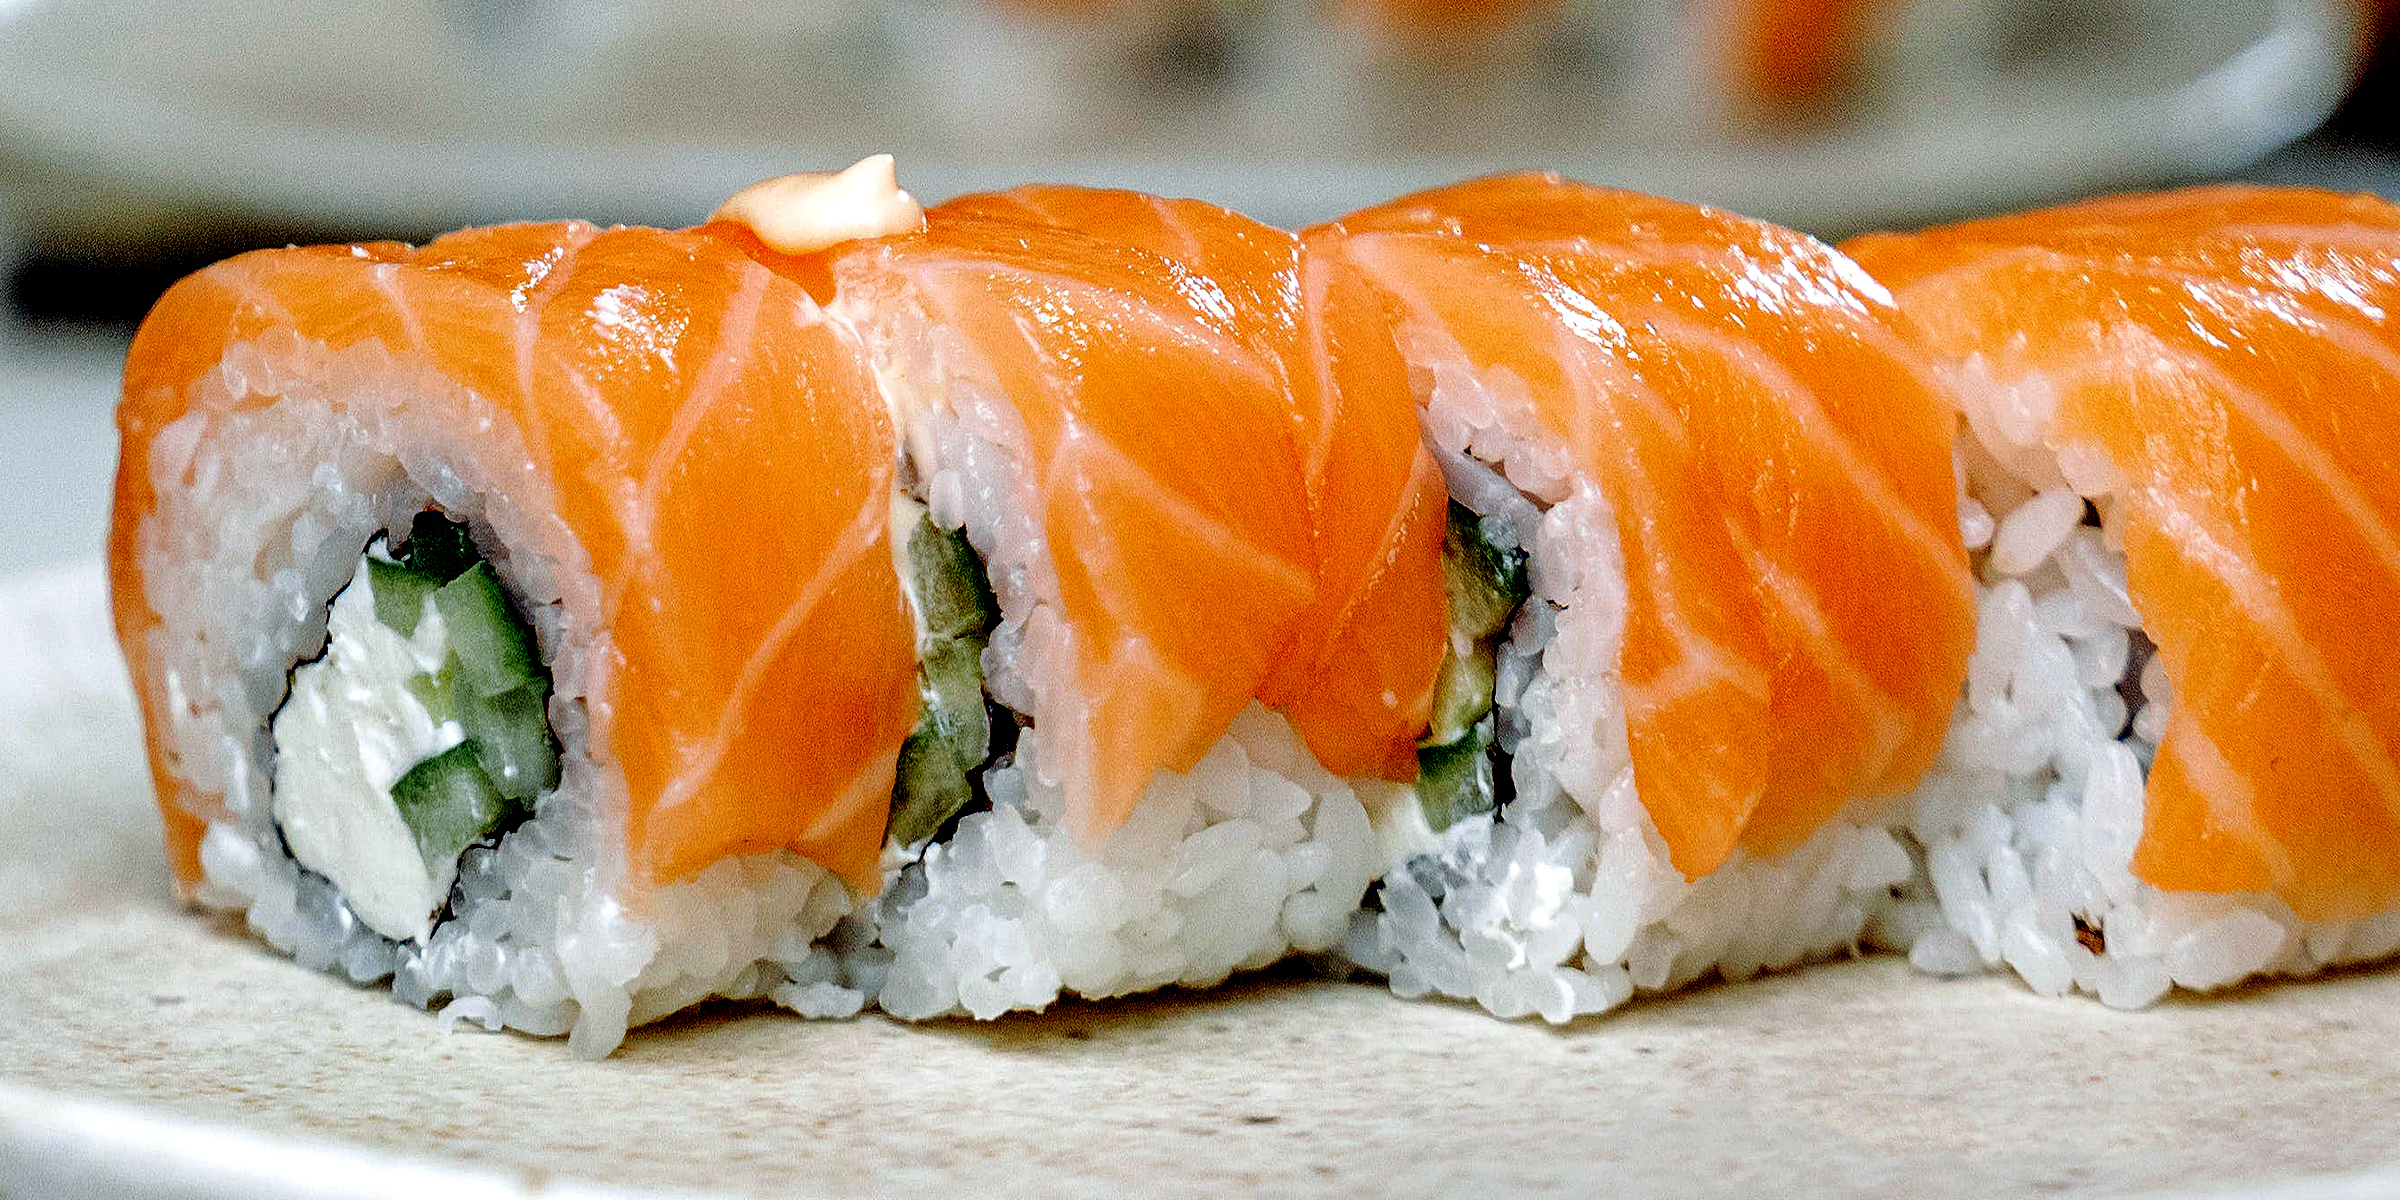 A plate of sushi | Source: Pexels